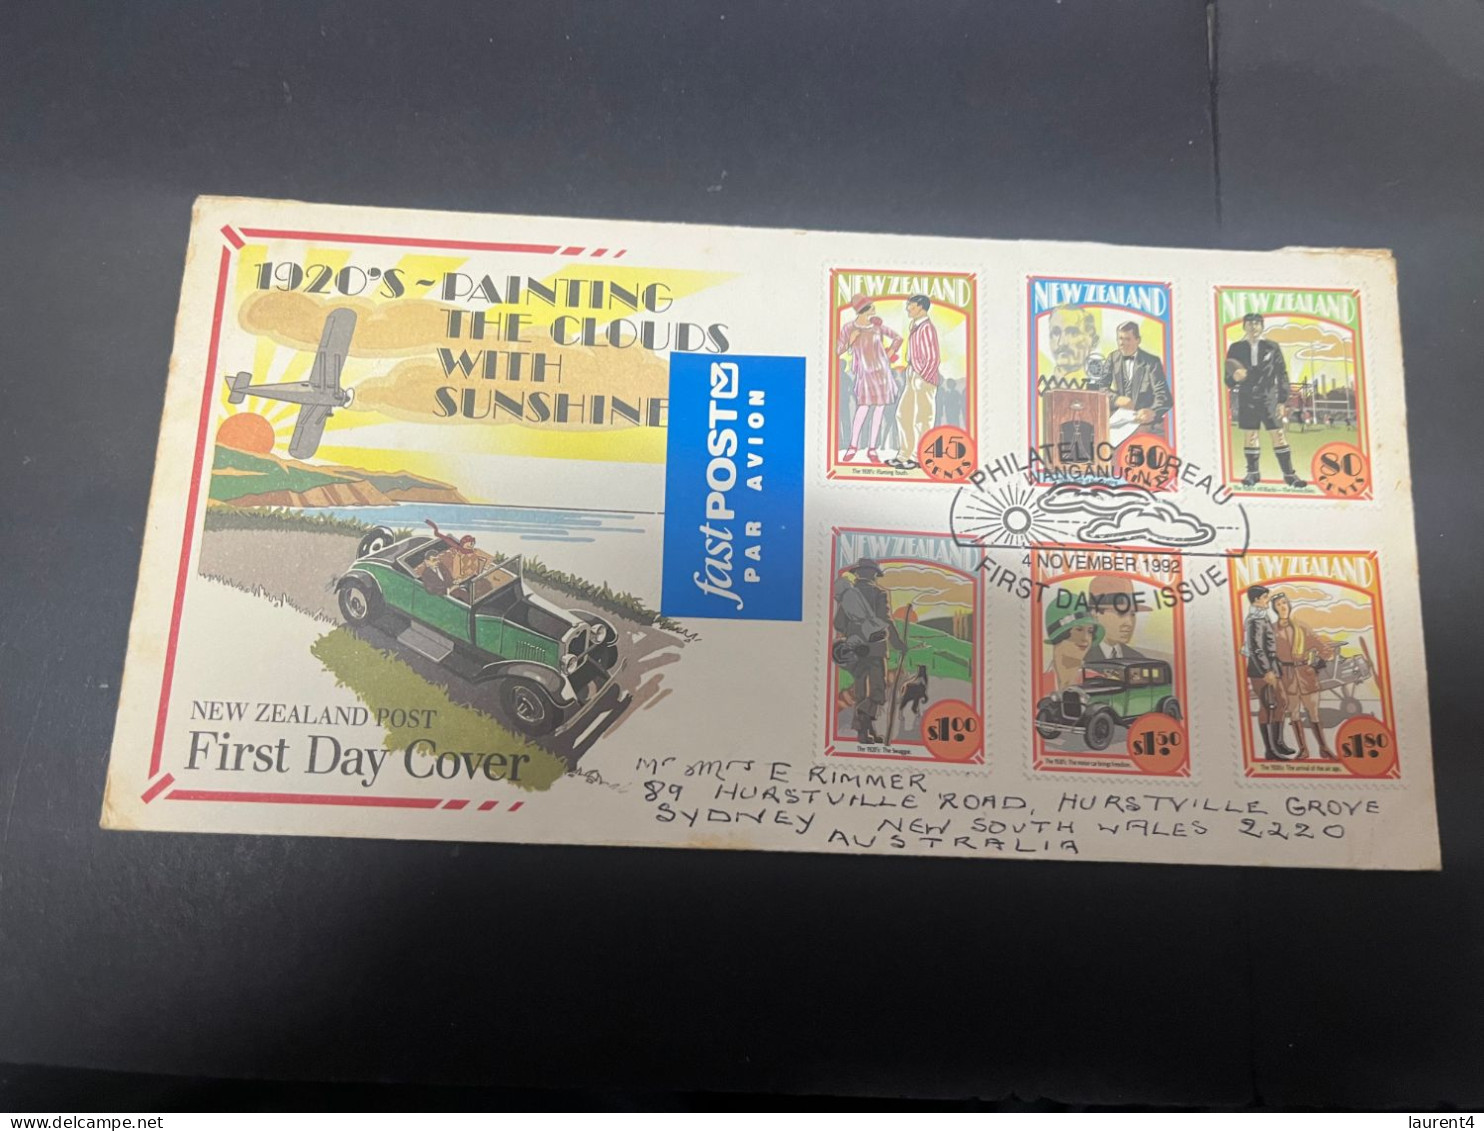 14-4-2024 (2 Z 4) FDC Used As Postage - New Zealand - Posted To Sydney 1992 - Painting The Clouds With Sunshine - FDC